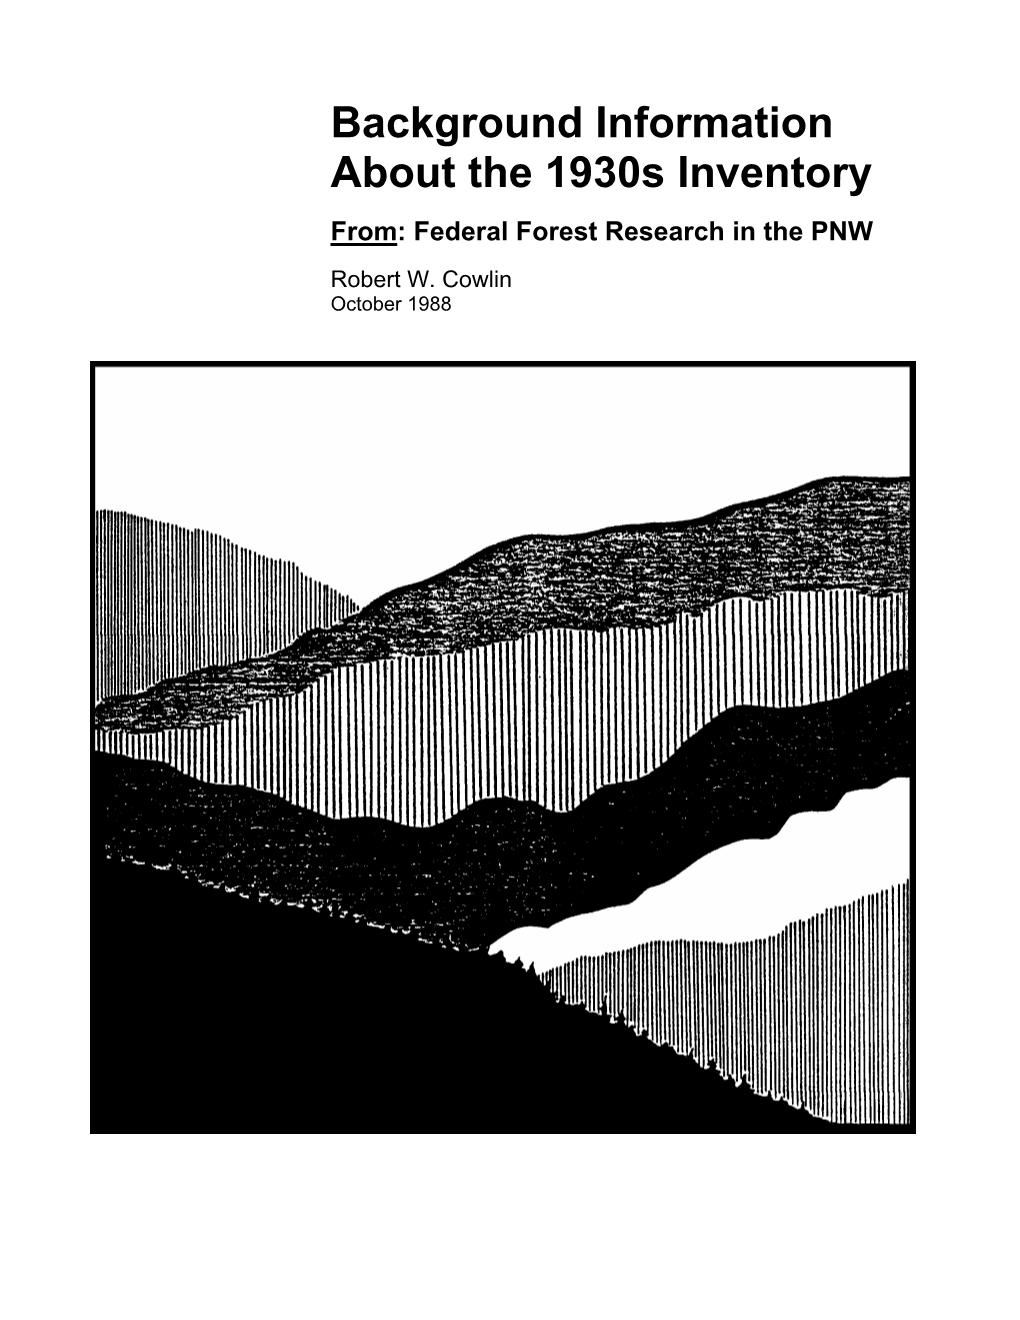 Background Information About the 1930S Inventory